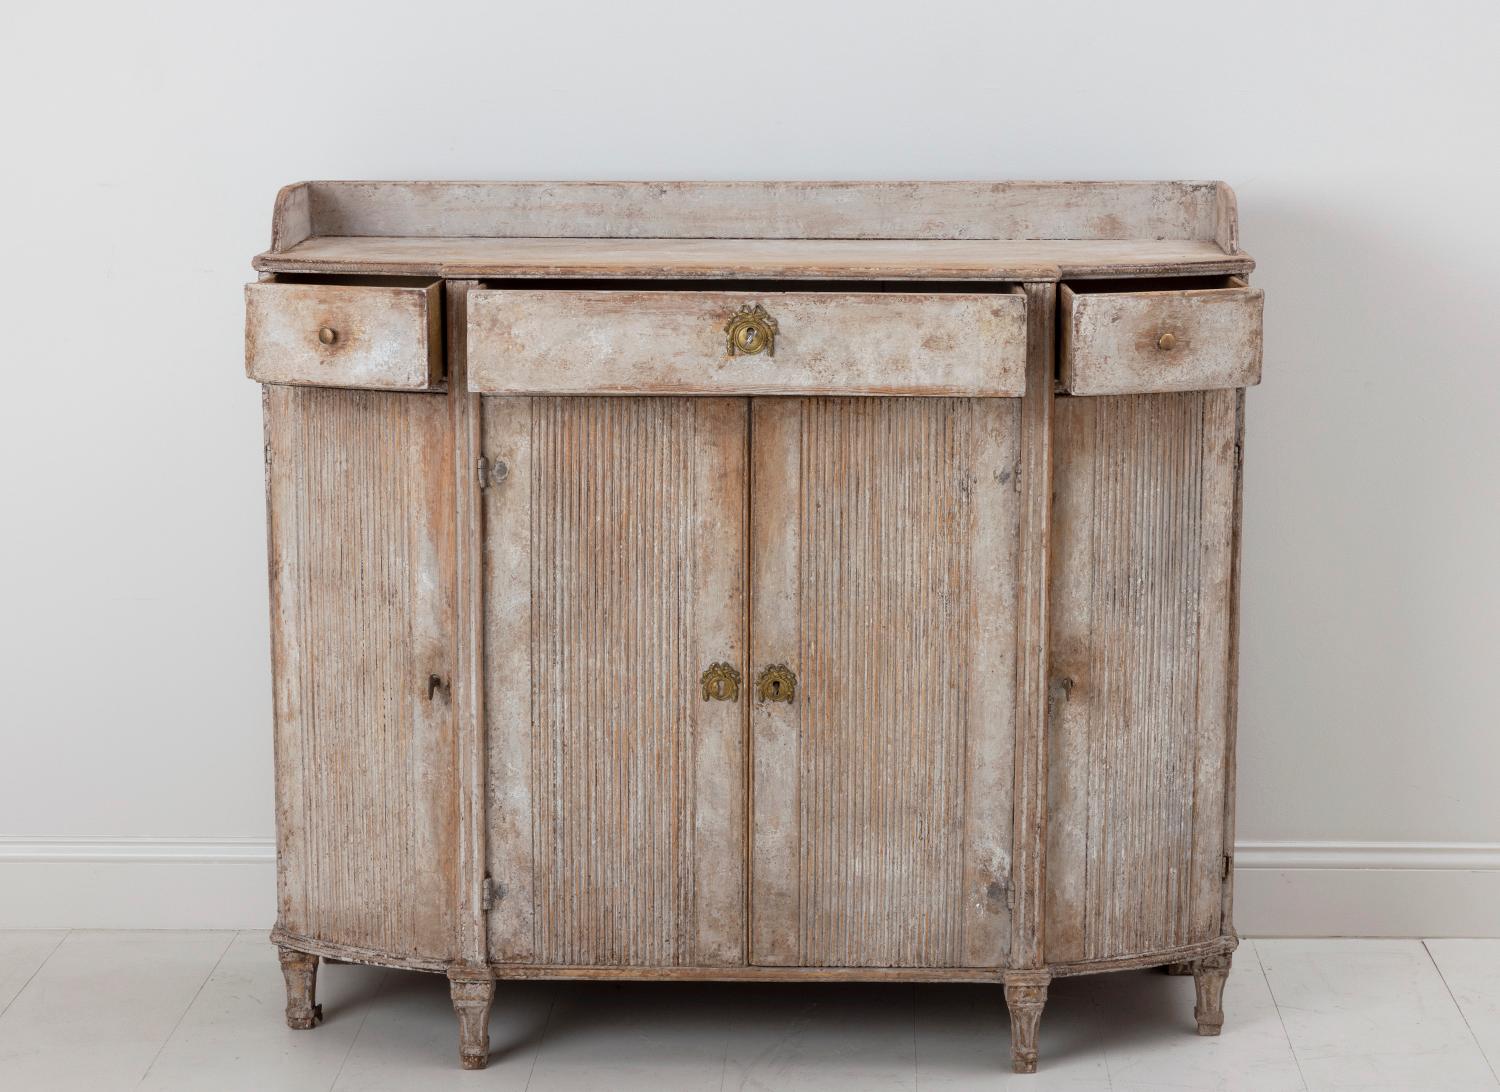 Hand-Crafted 18th C. Swedish Gustavian Painted Demilune Buffet Cabinet with Reeded Doors